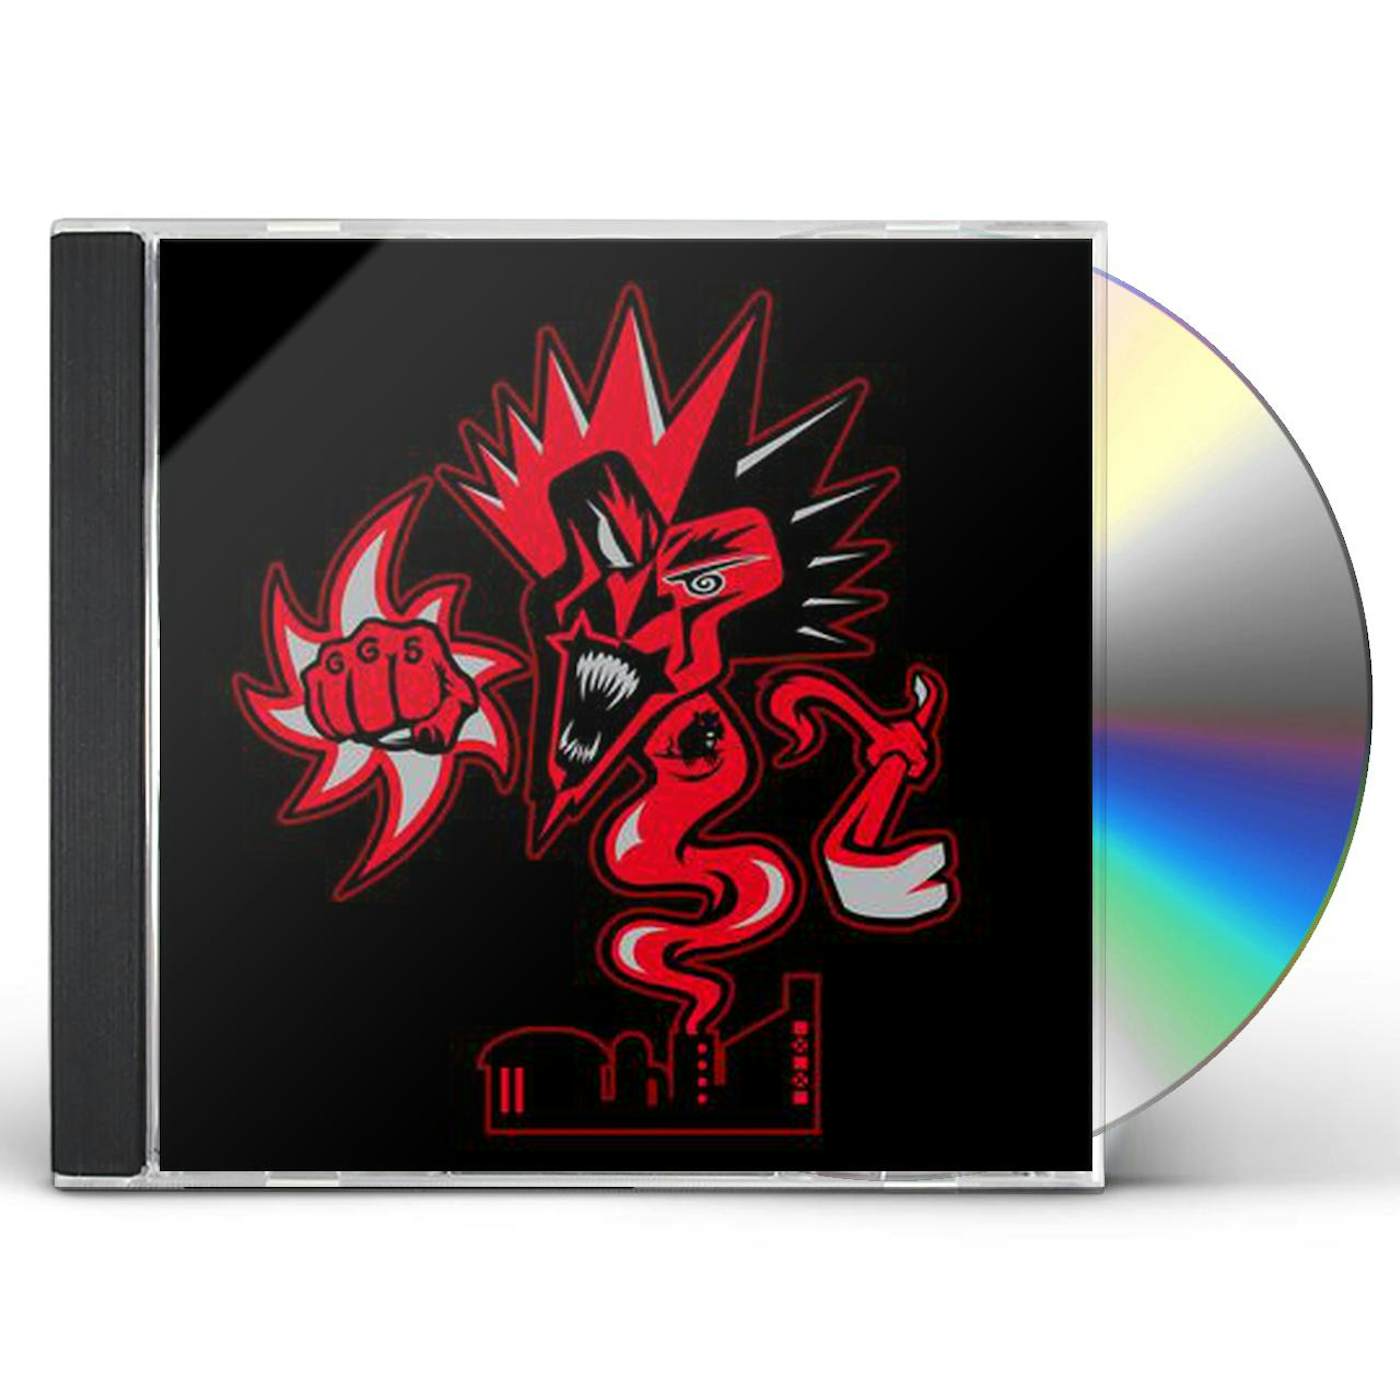 Insane Clown Posse FEARLESS FRED FURY (INCLUDES DL CODE FOR FLIP THE RAT: 13 TRACKS) CD